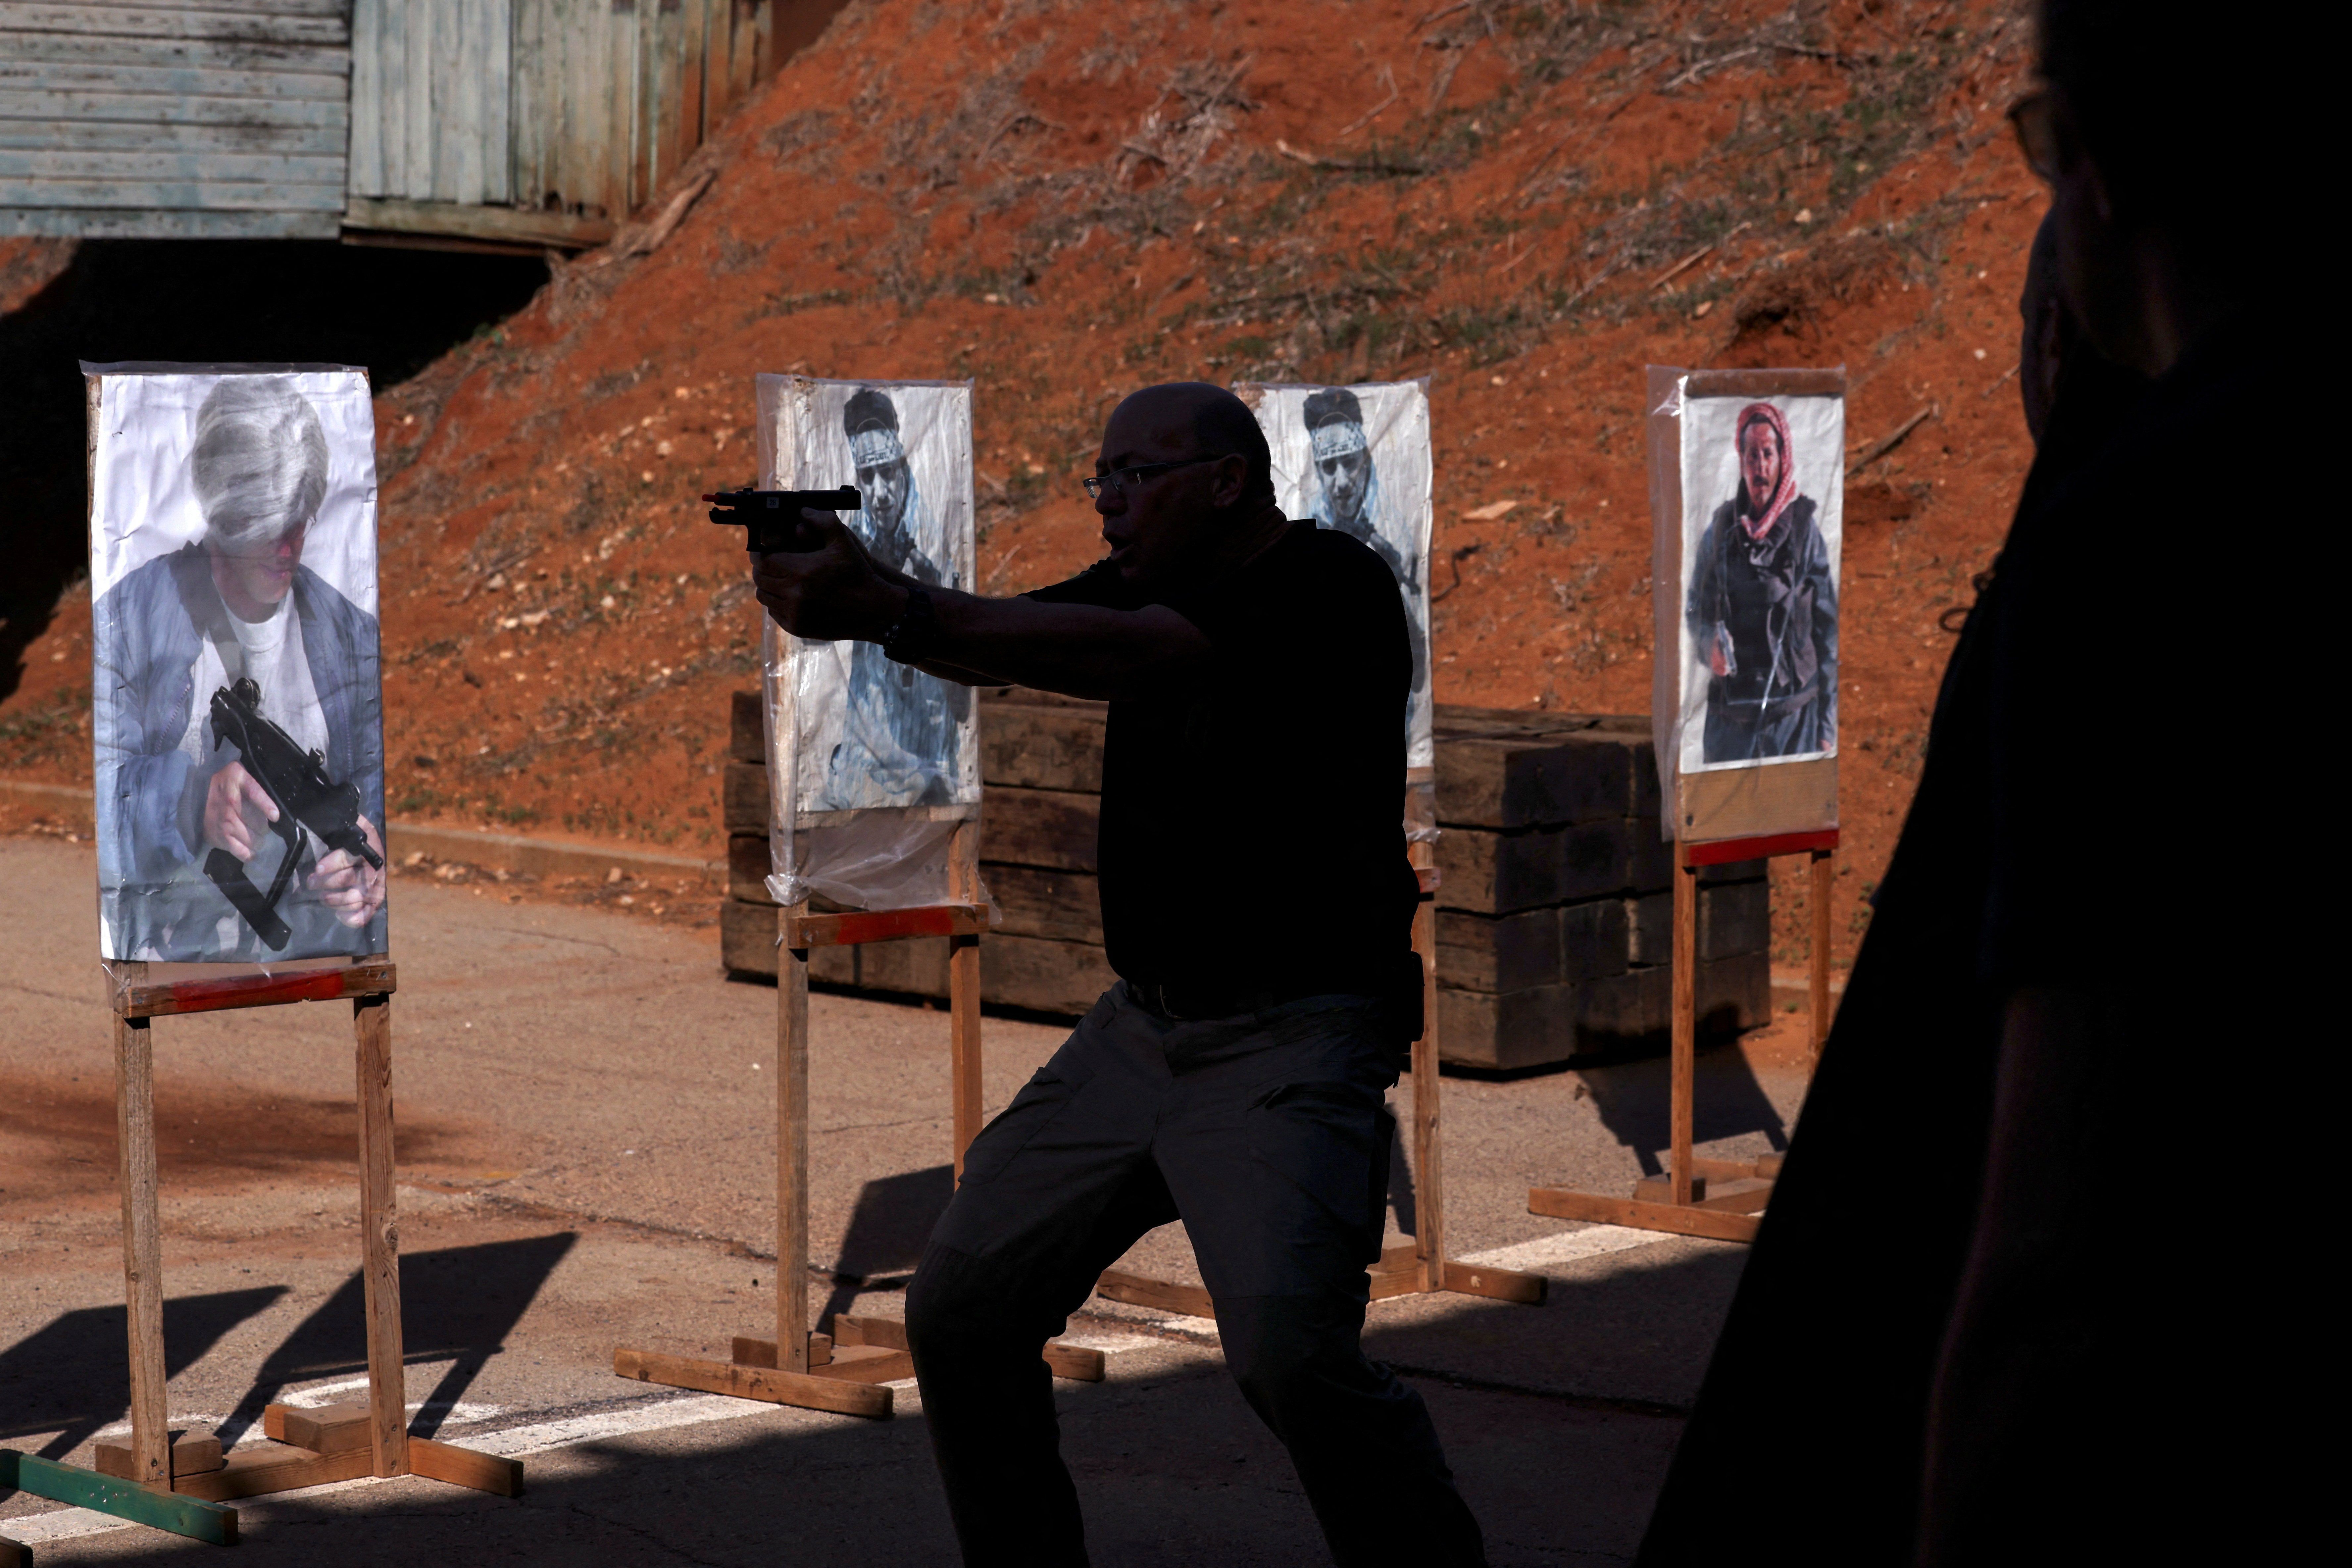 An instructor performs a demonstration during a training session at a shooting range in Kfar Saba, Israel, 